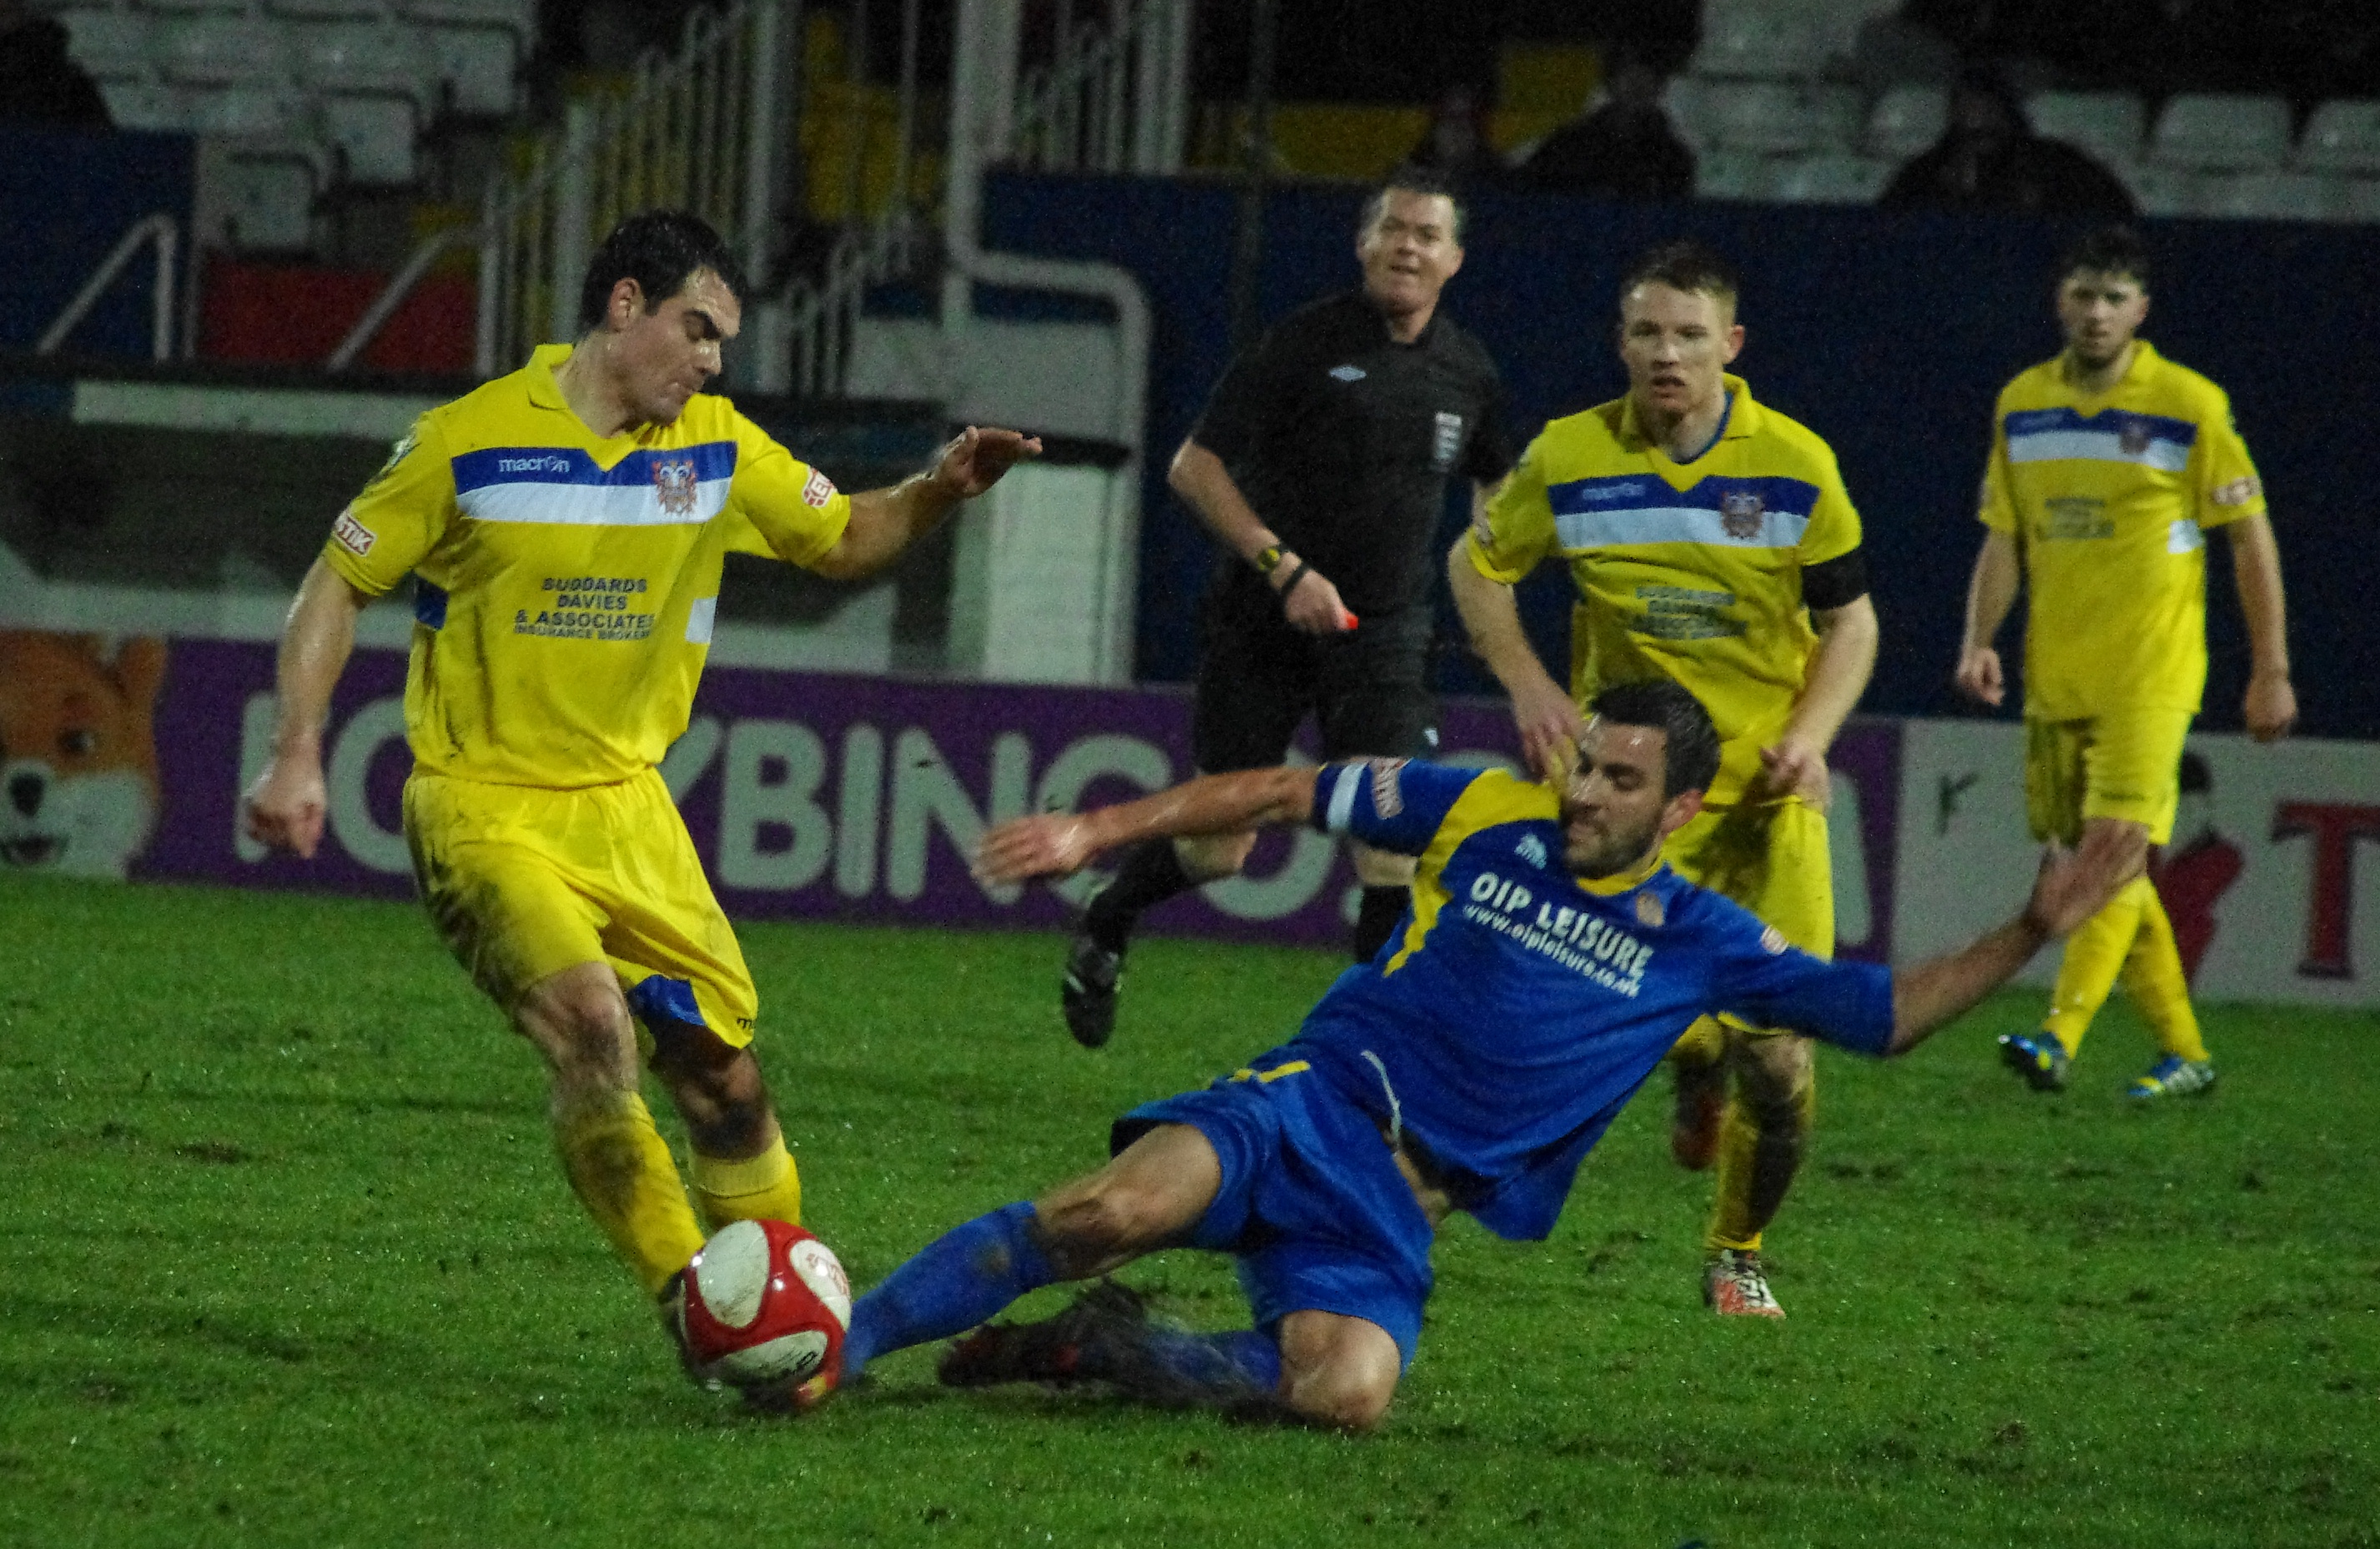 Wakefield FC and Farsley AFC battled it out in torrential rain during January